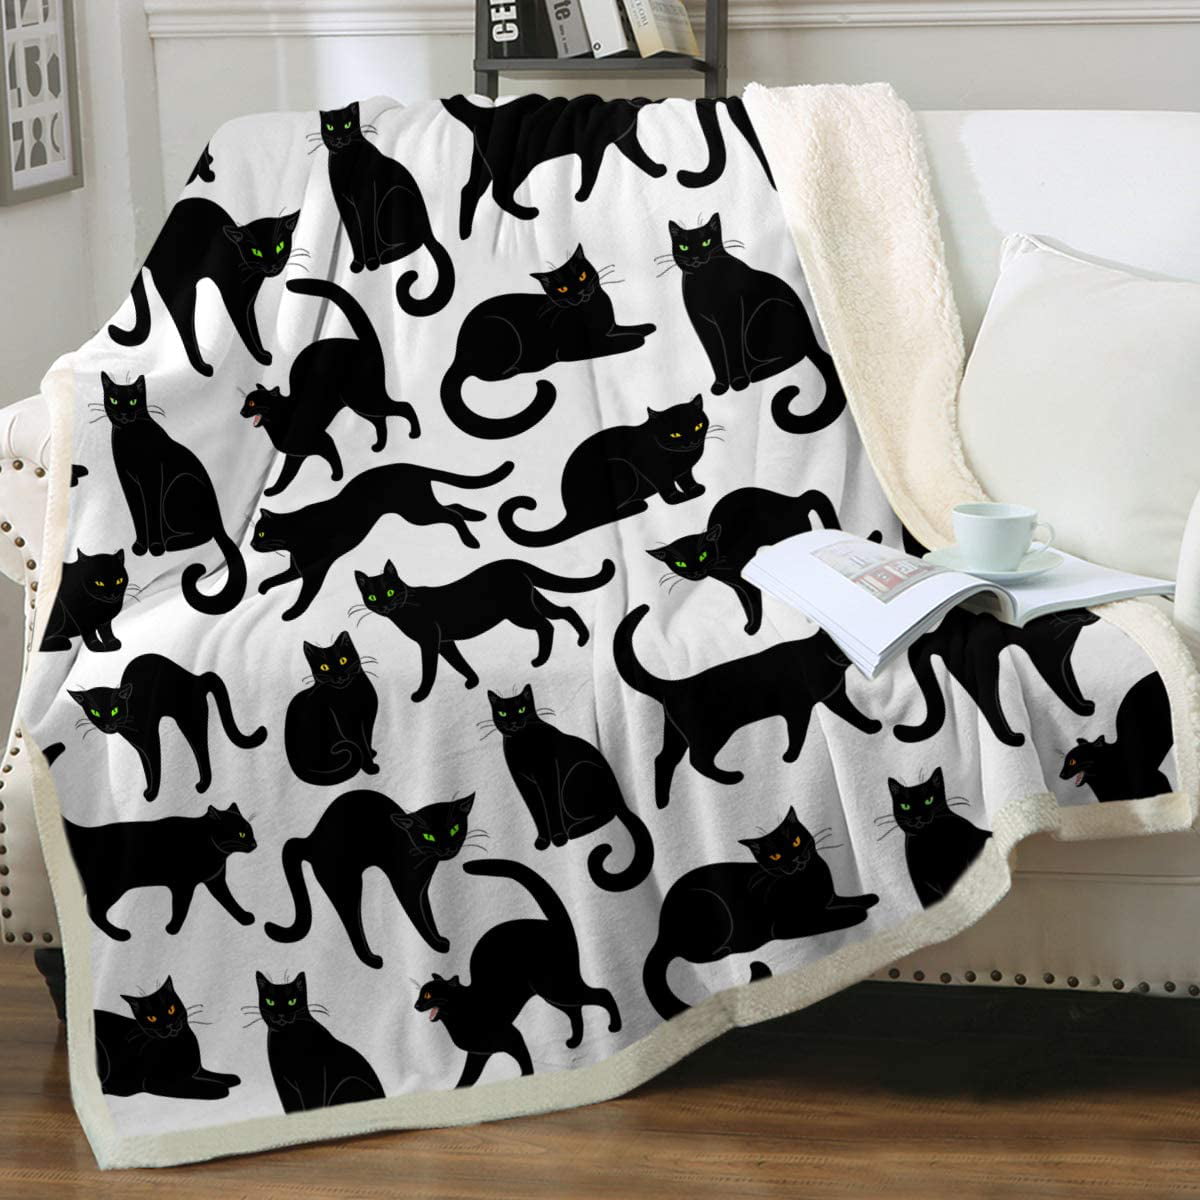 Pattern with Kitten Throw Blanket Micro Fleece Bed Blankets Super Soft Plush Suitable for Kids Teenagers Adults